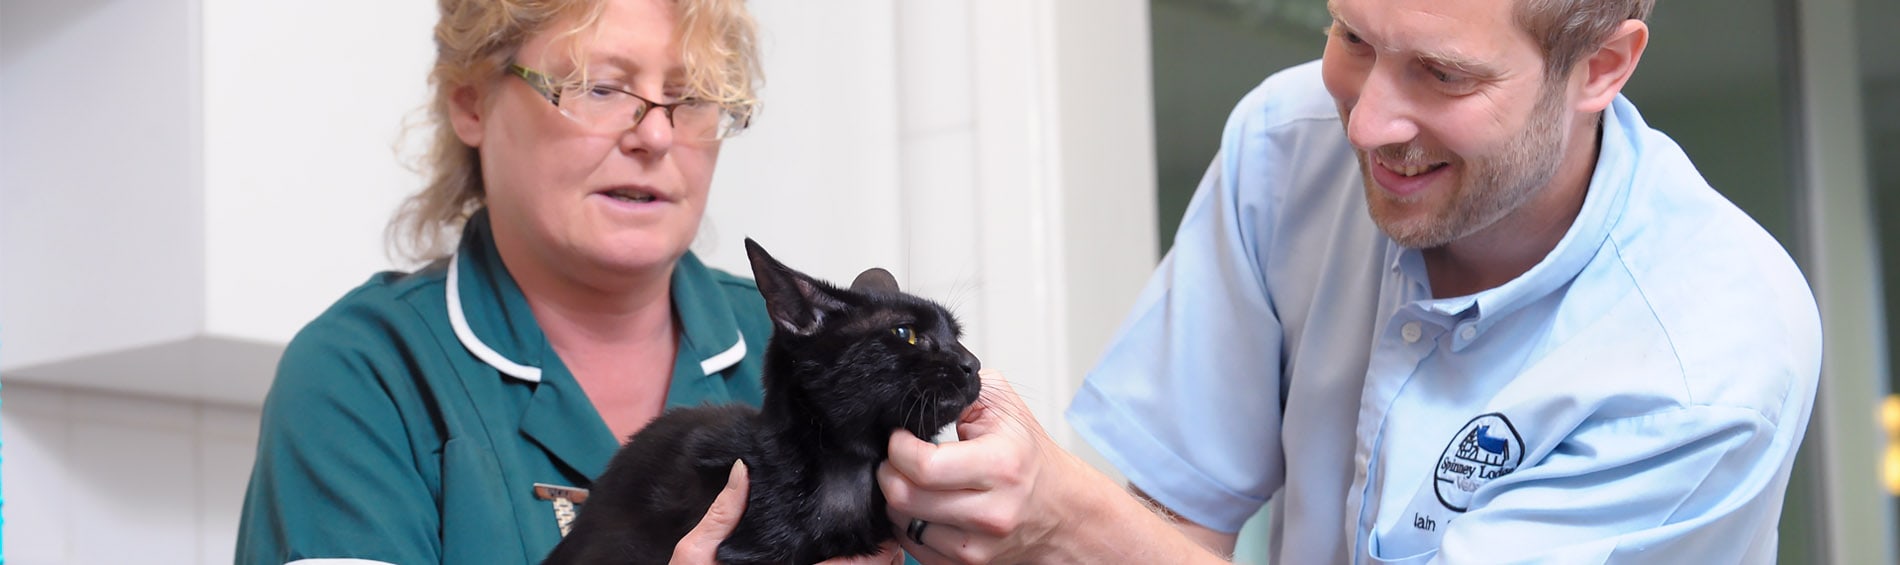 How to Give Your Cat Medication | Spinney Vets